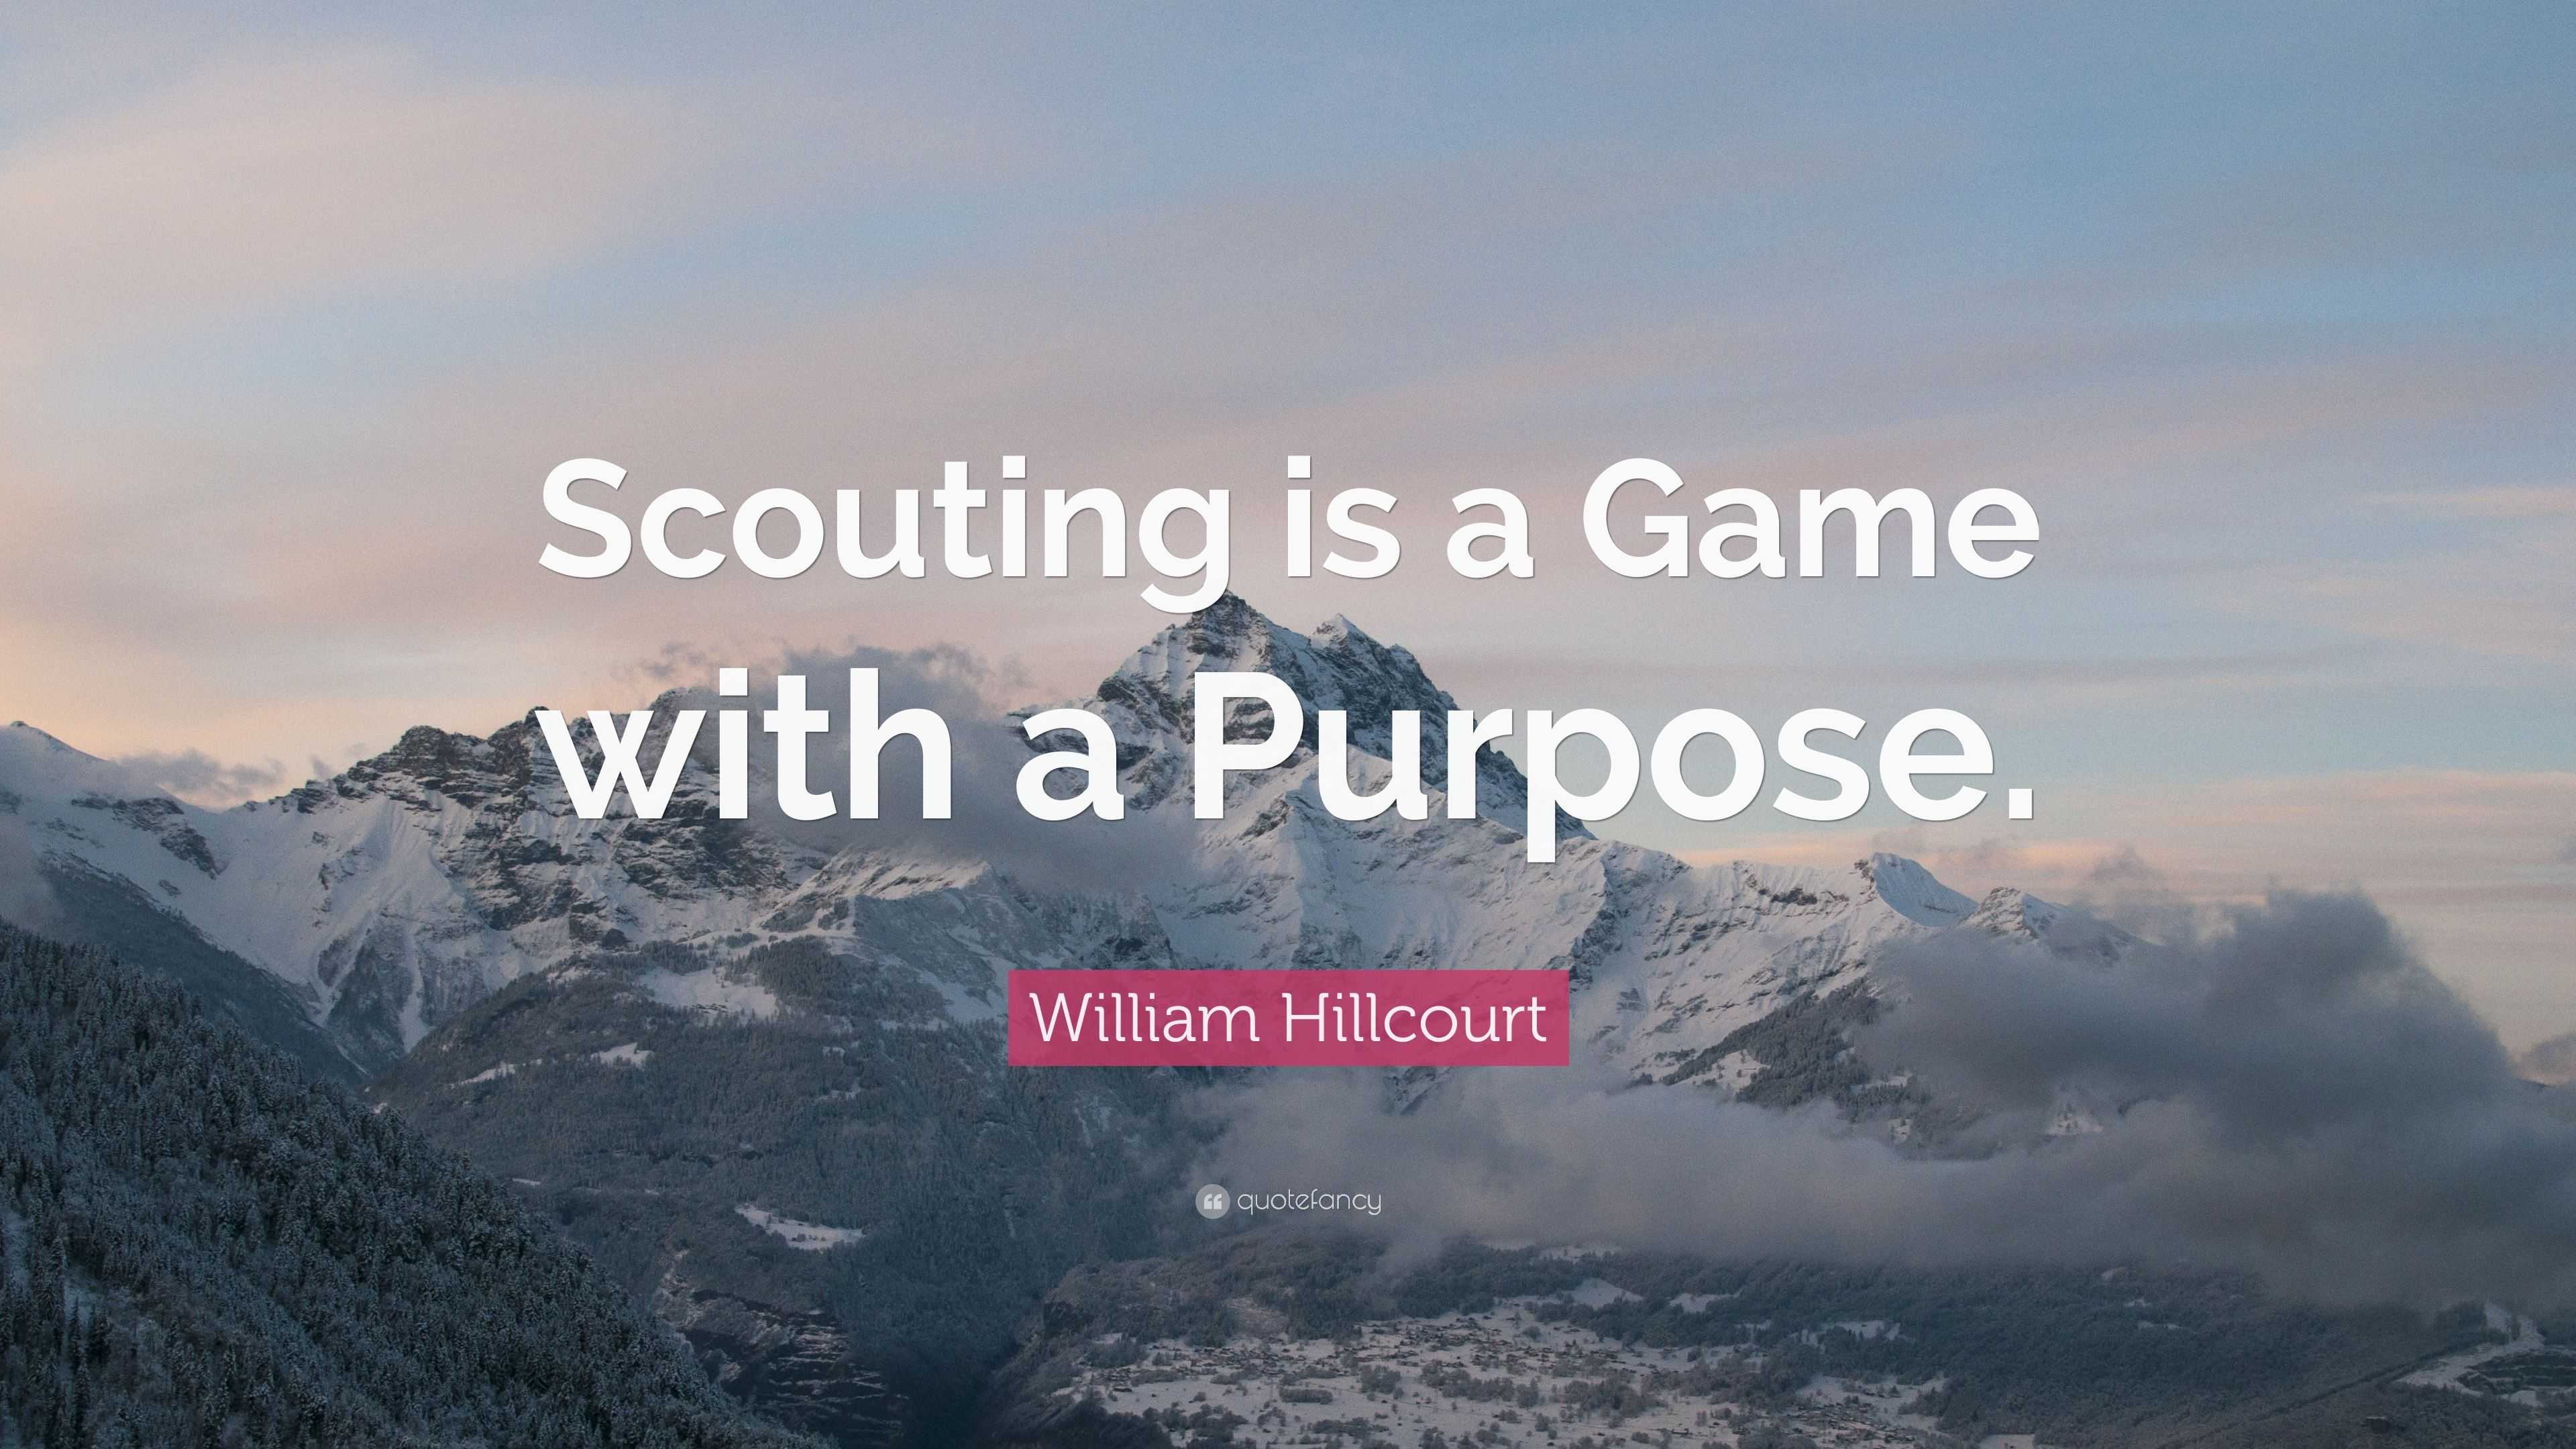 William Hillcourt Quote: “Scouting is a Game with a Purpose.”